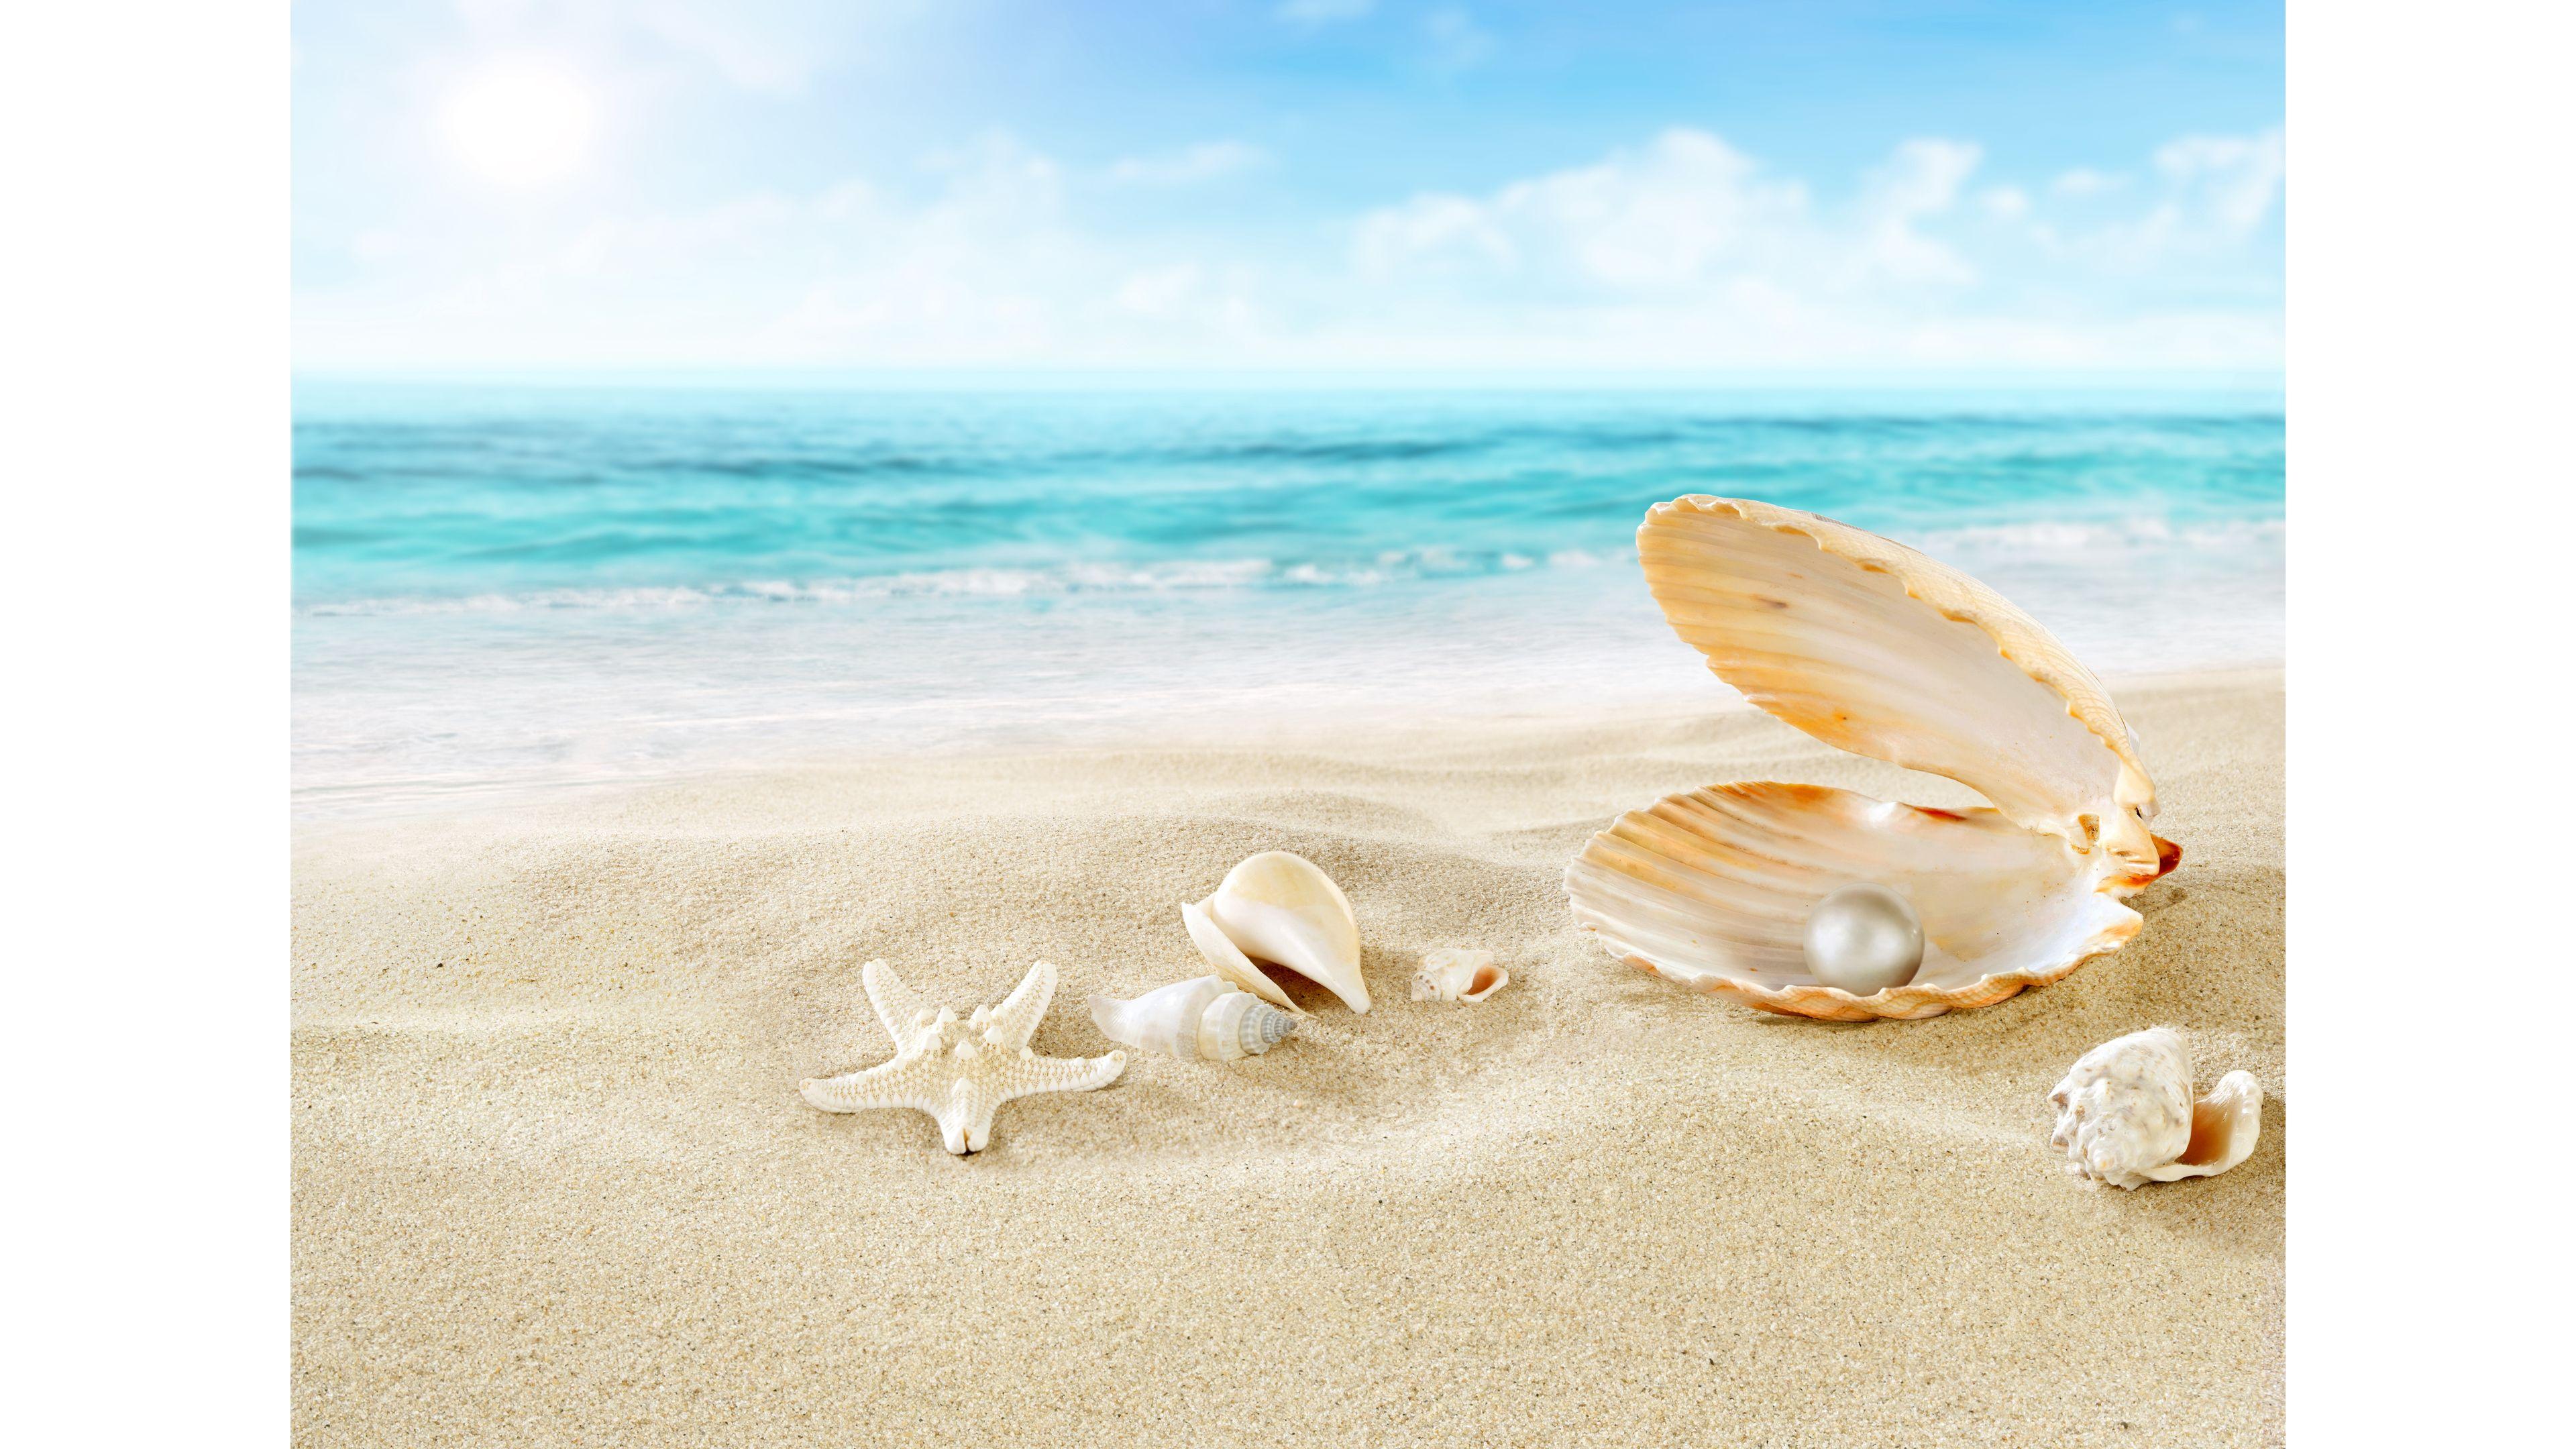 Seashells On The Beach Wallpapers Wallpaper Cave